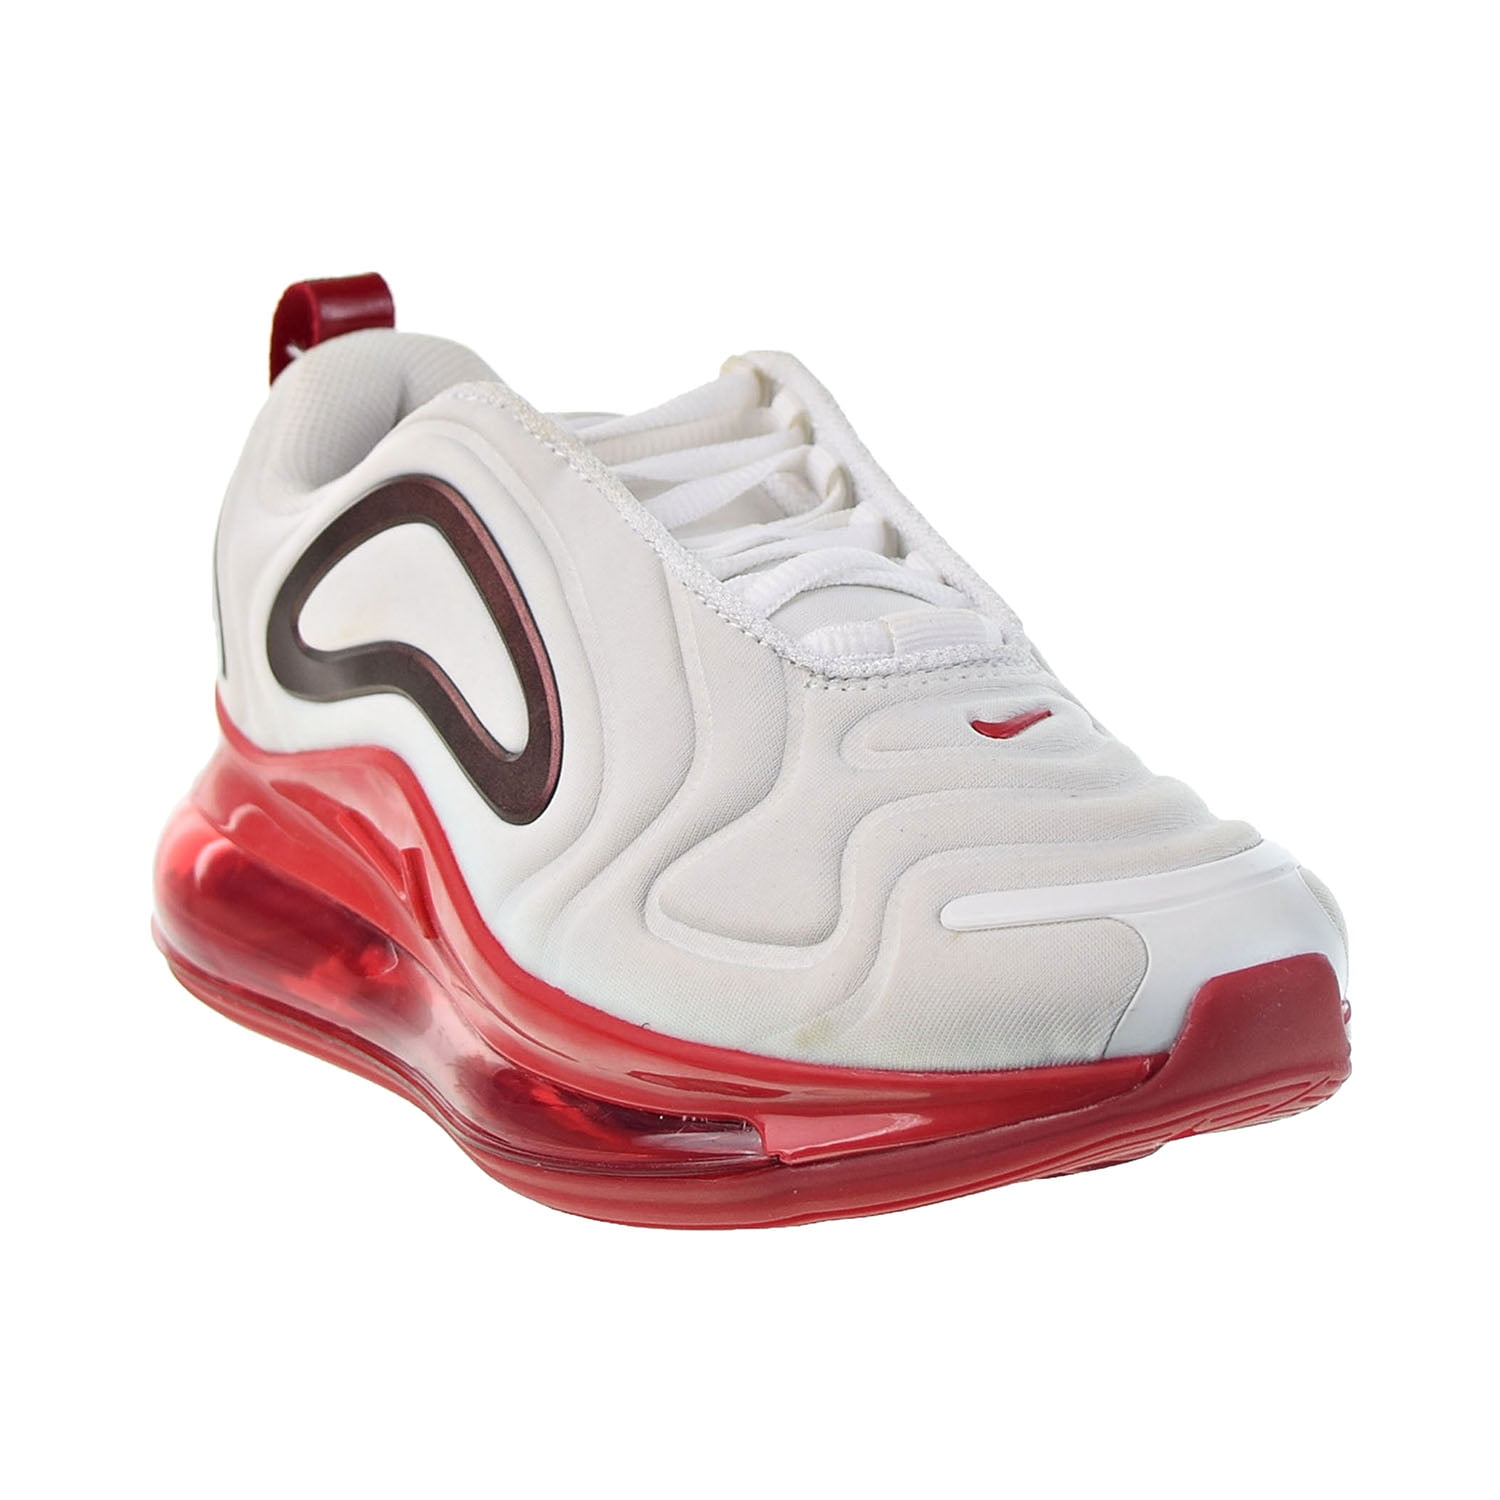 Nike Air Max 720 Takes on Spring with a White and Gym Red Colorway -  JustFreshKicks